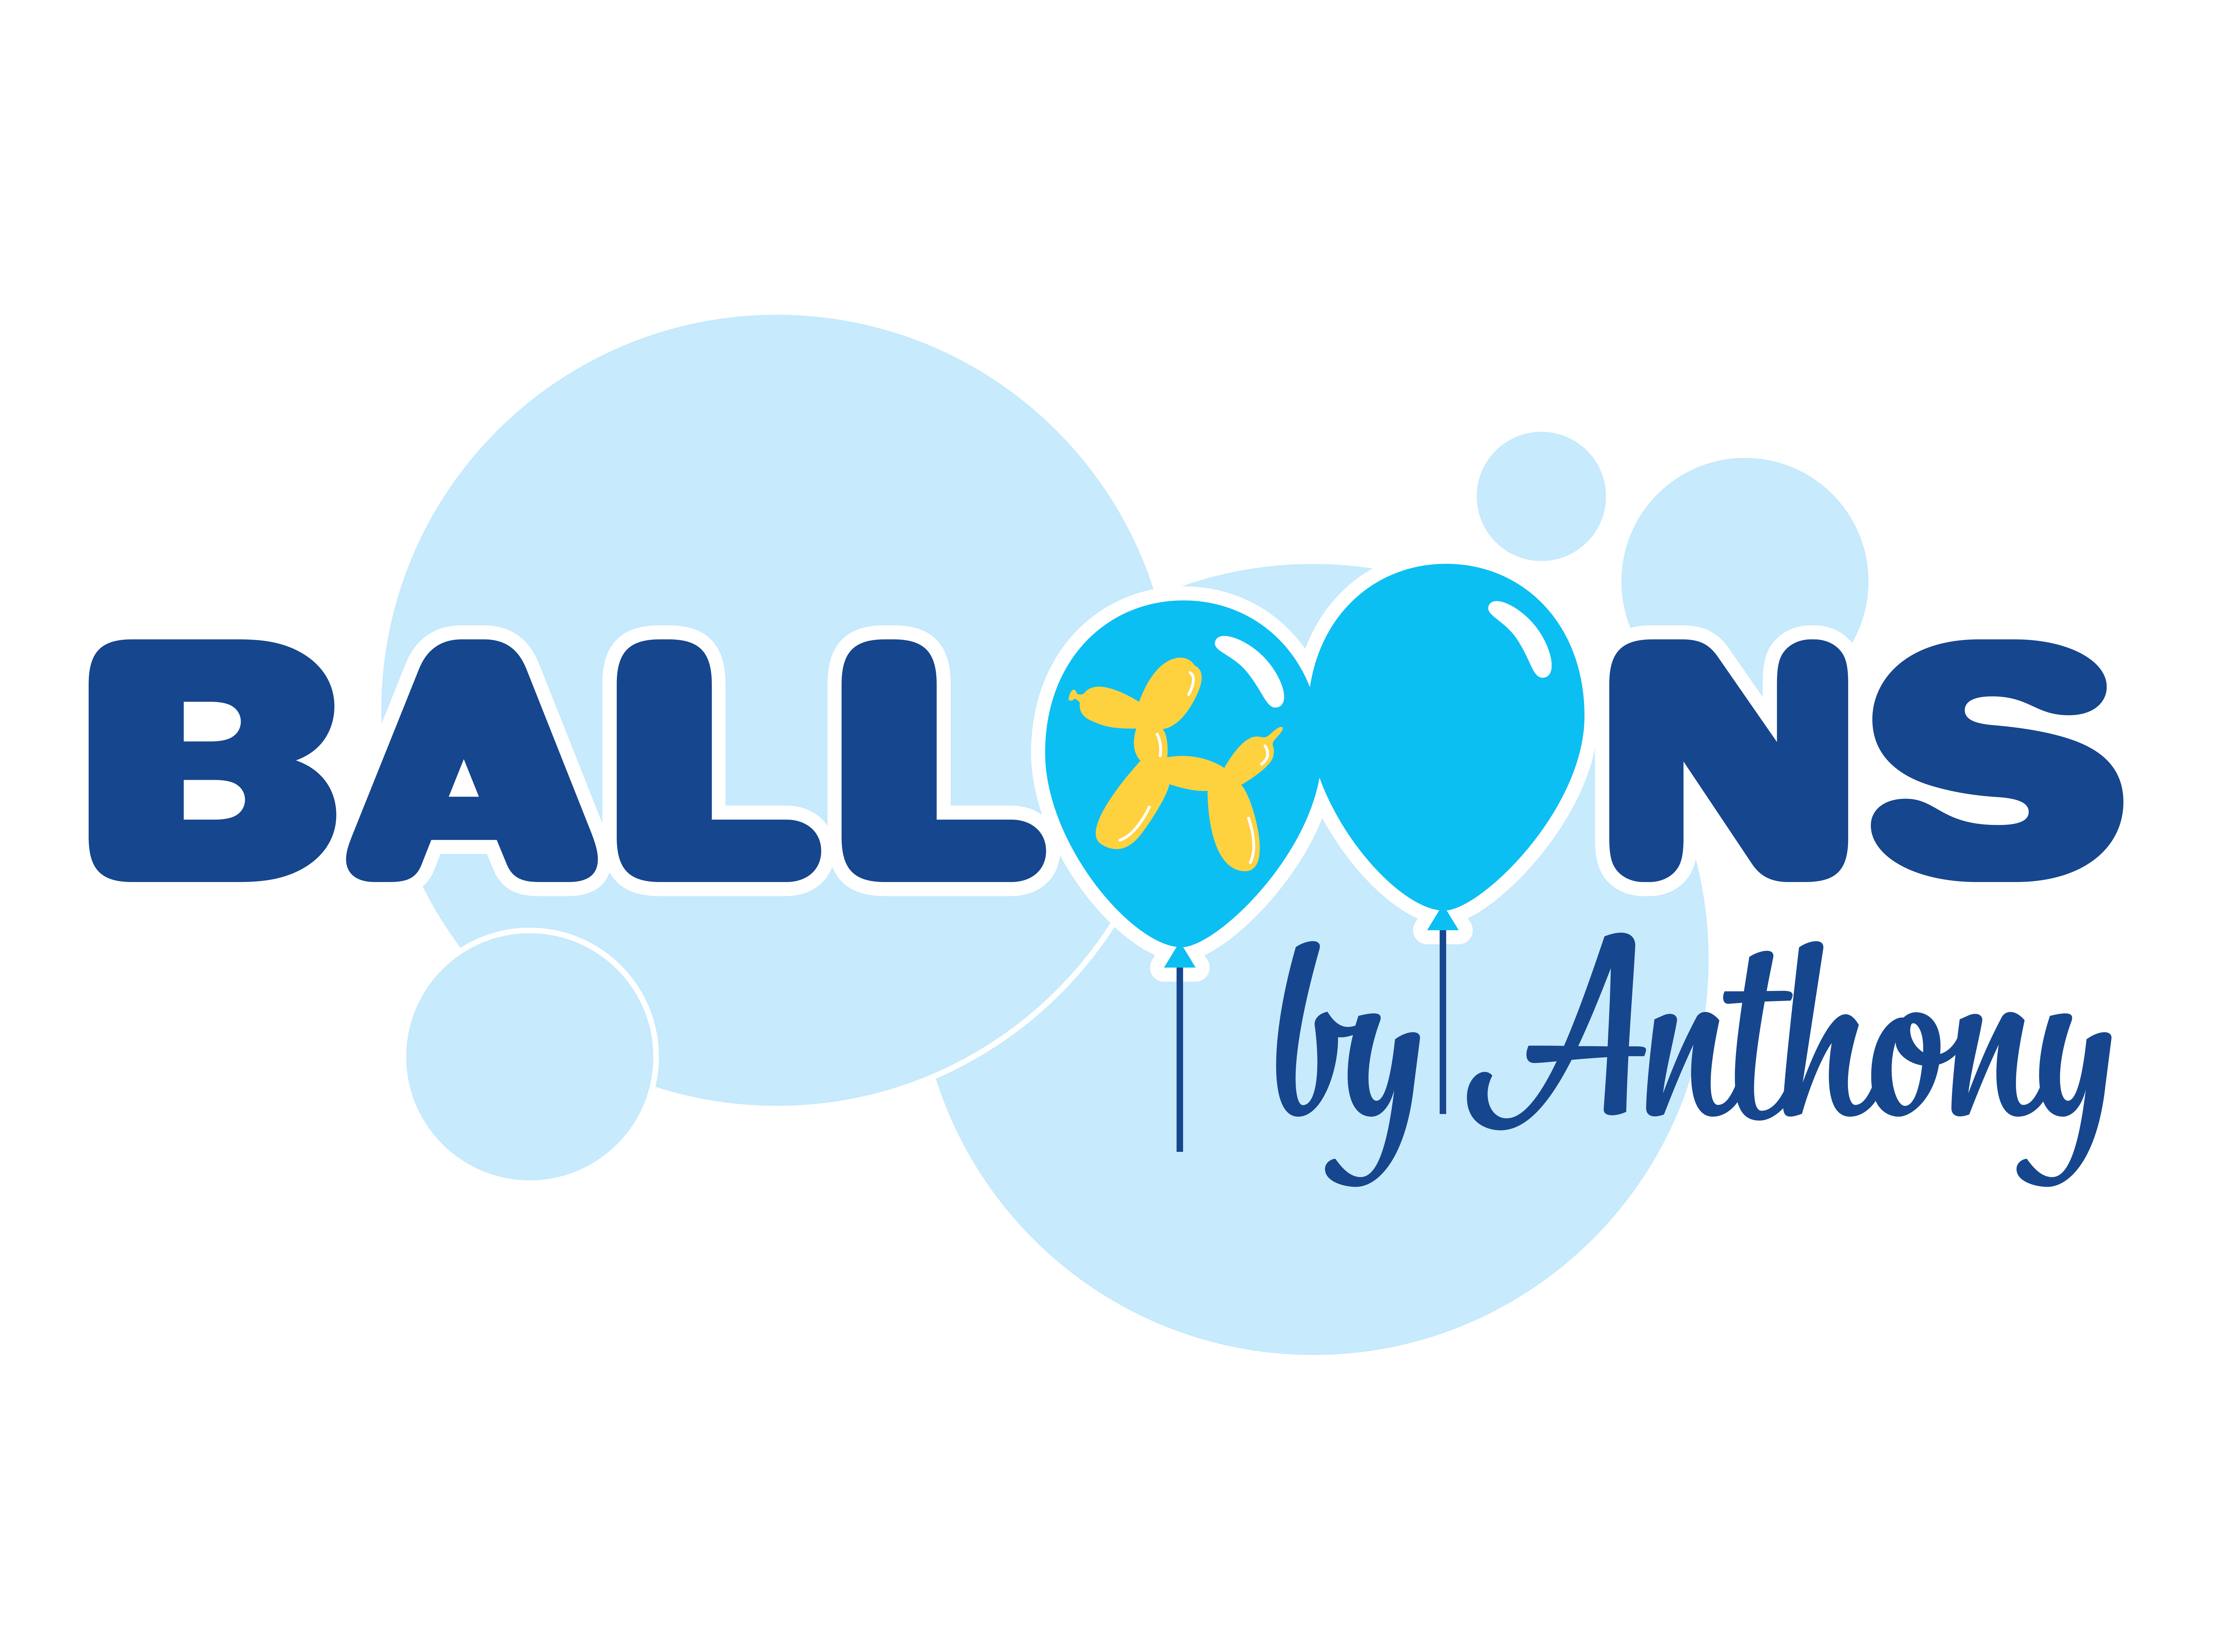 Balloons By Anthony